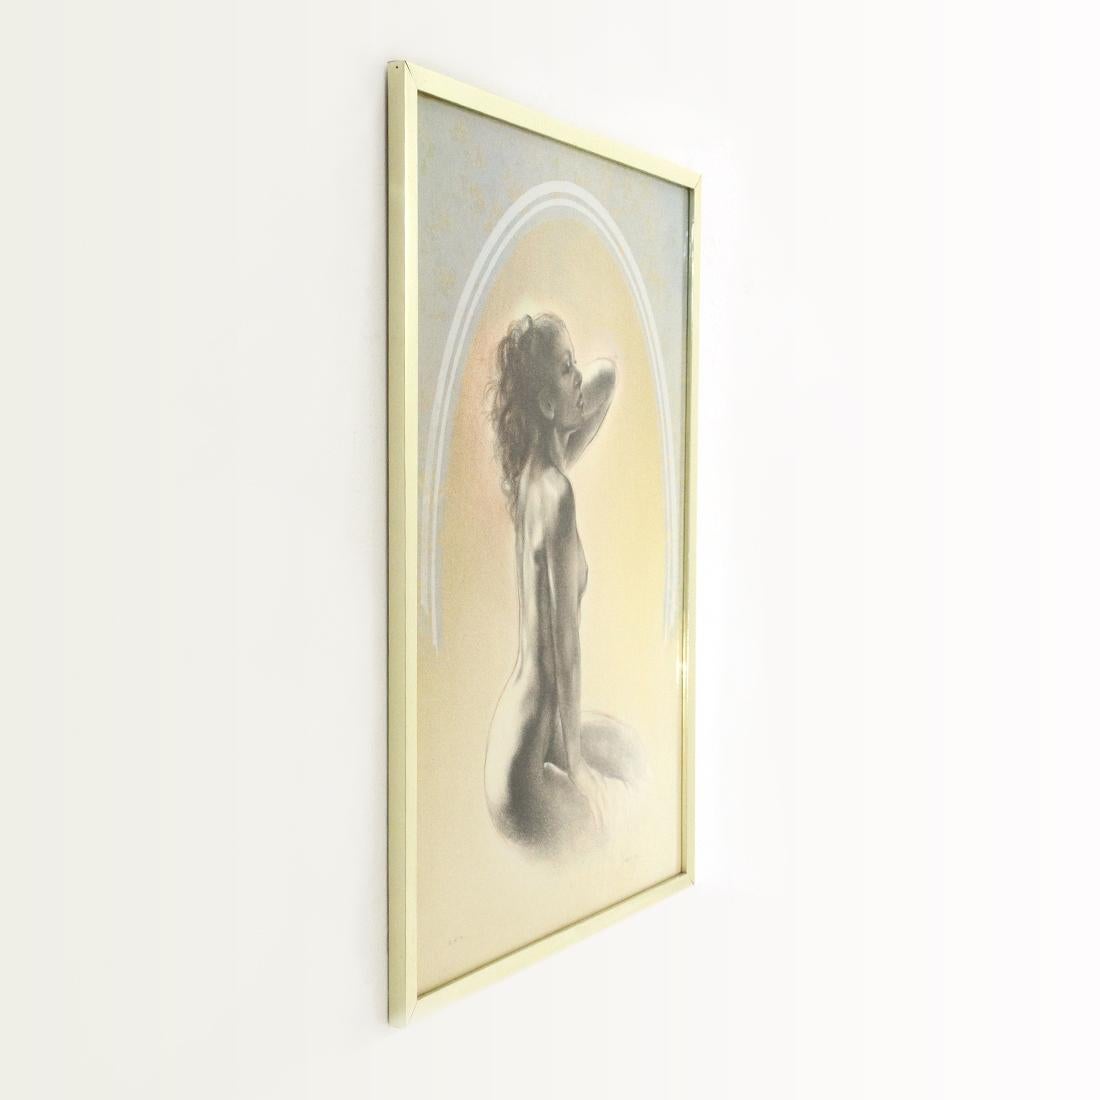 Painting executed by the master Giampaolo Parini in the 1980s.
Mixed media on paper.
Signed and dated lower right.
Brass-plated metal frame.
Good general conditions.

Dimensions: Length 52 cm, depth 2 cm, height 72 cm.